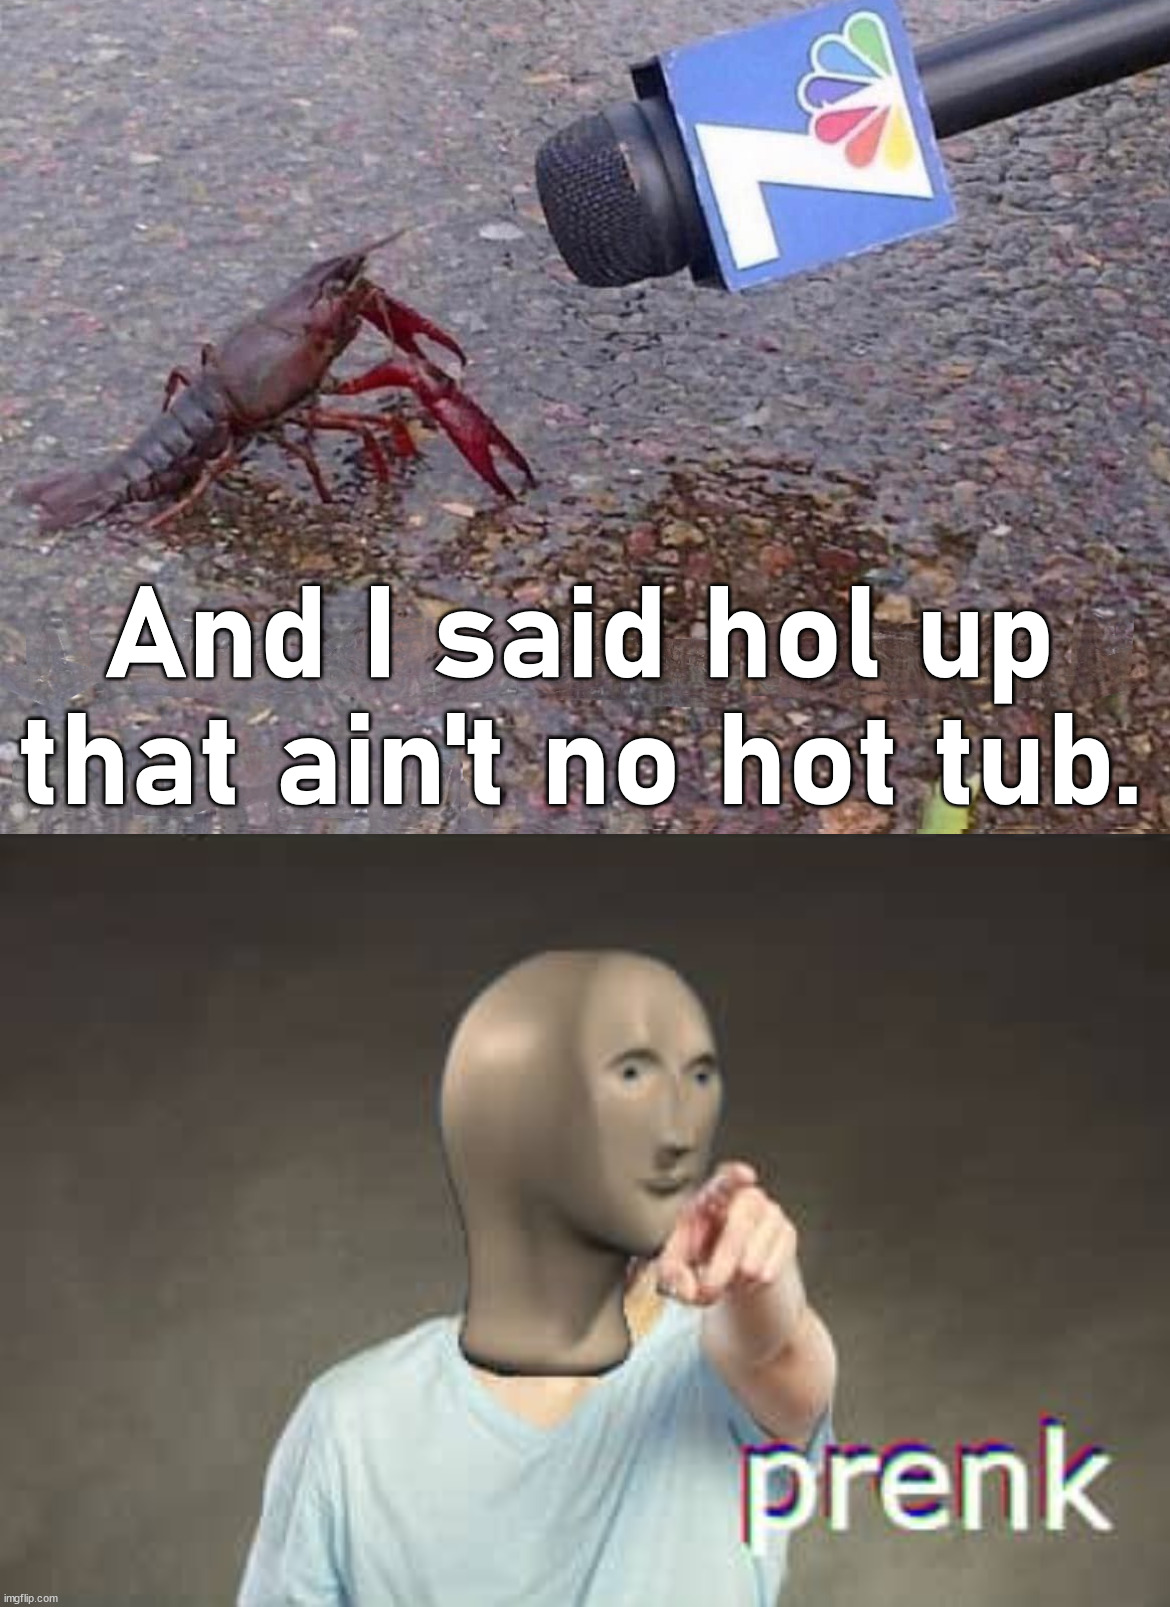 Just a little warm water dude. |  And I said hol up that ain't no hot tub. | image tagged in prenk,yummy,hot water,crawfish,the boiler room of hell | made w/ Imgflip meme maker